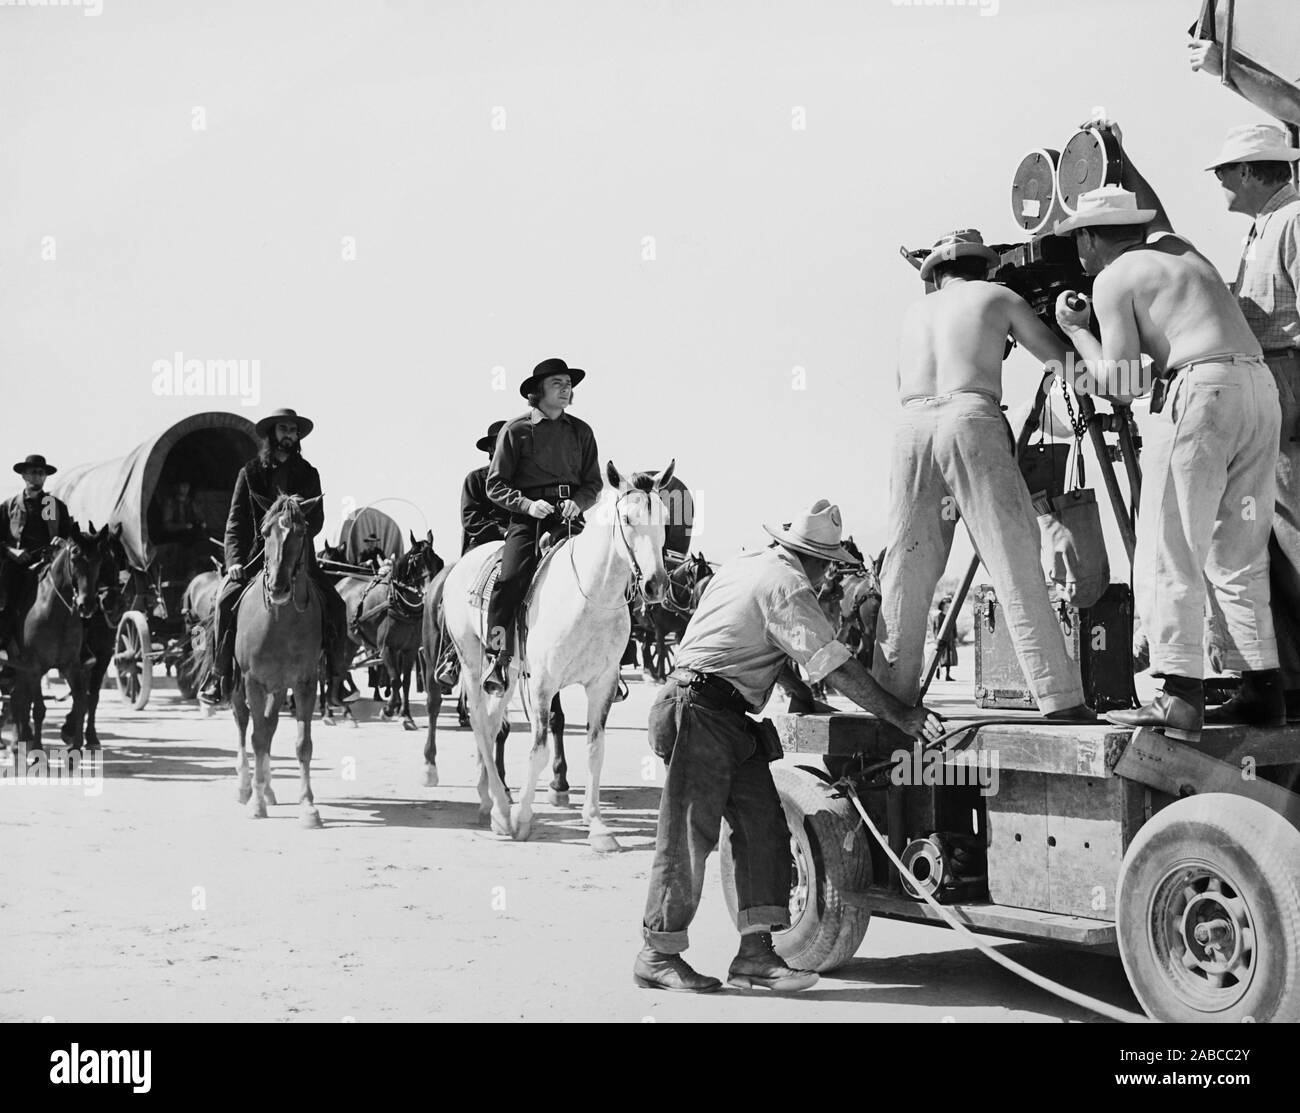 BRIGHAM YOUNG, horseback front from left: John Carradine, Dean Jagger, director Henry Hathaway (extreme right) filming on set, 1940, TM & Copyright © 20th Century Fox film Corp./courtesy Everett Collection Stock Photo